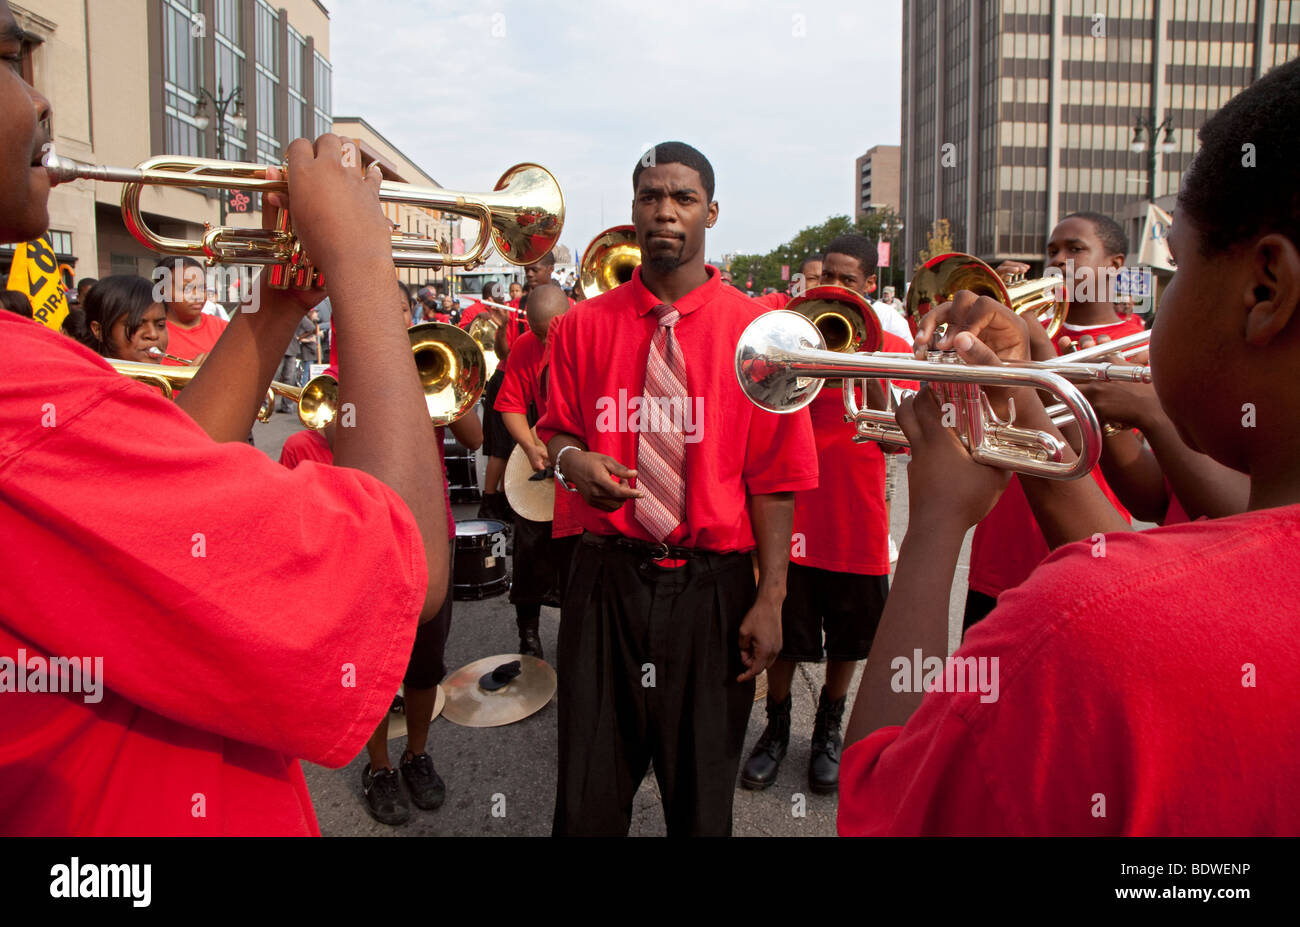 Detroit, Michigan - A high school marching band rehearses before participating in the Labor Day parade. Stock Photo